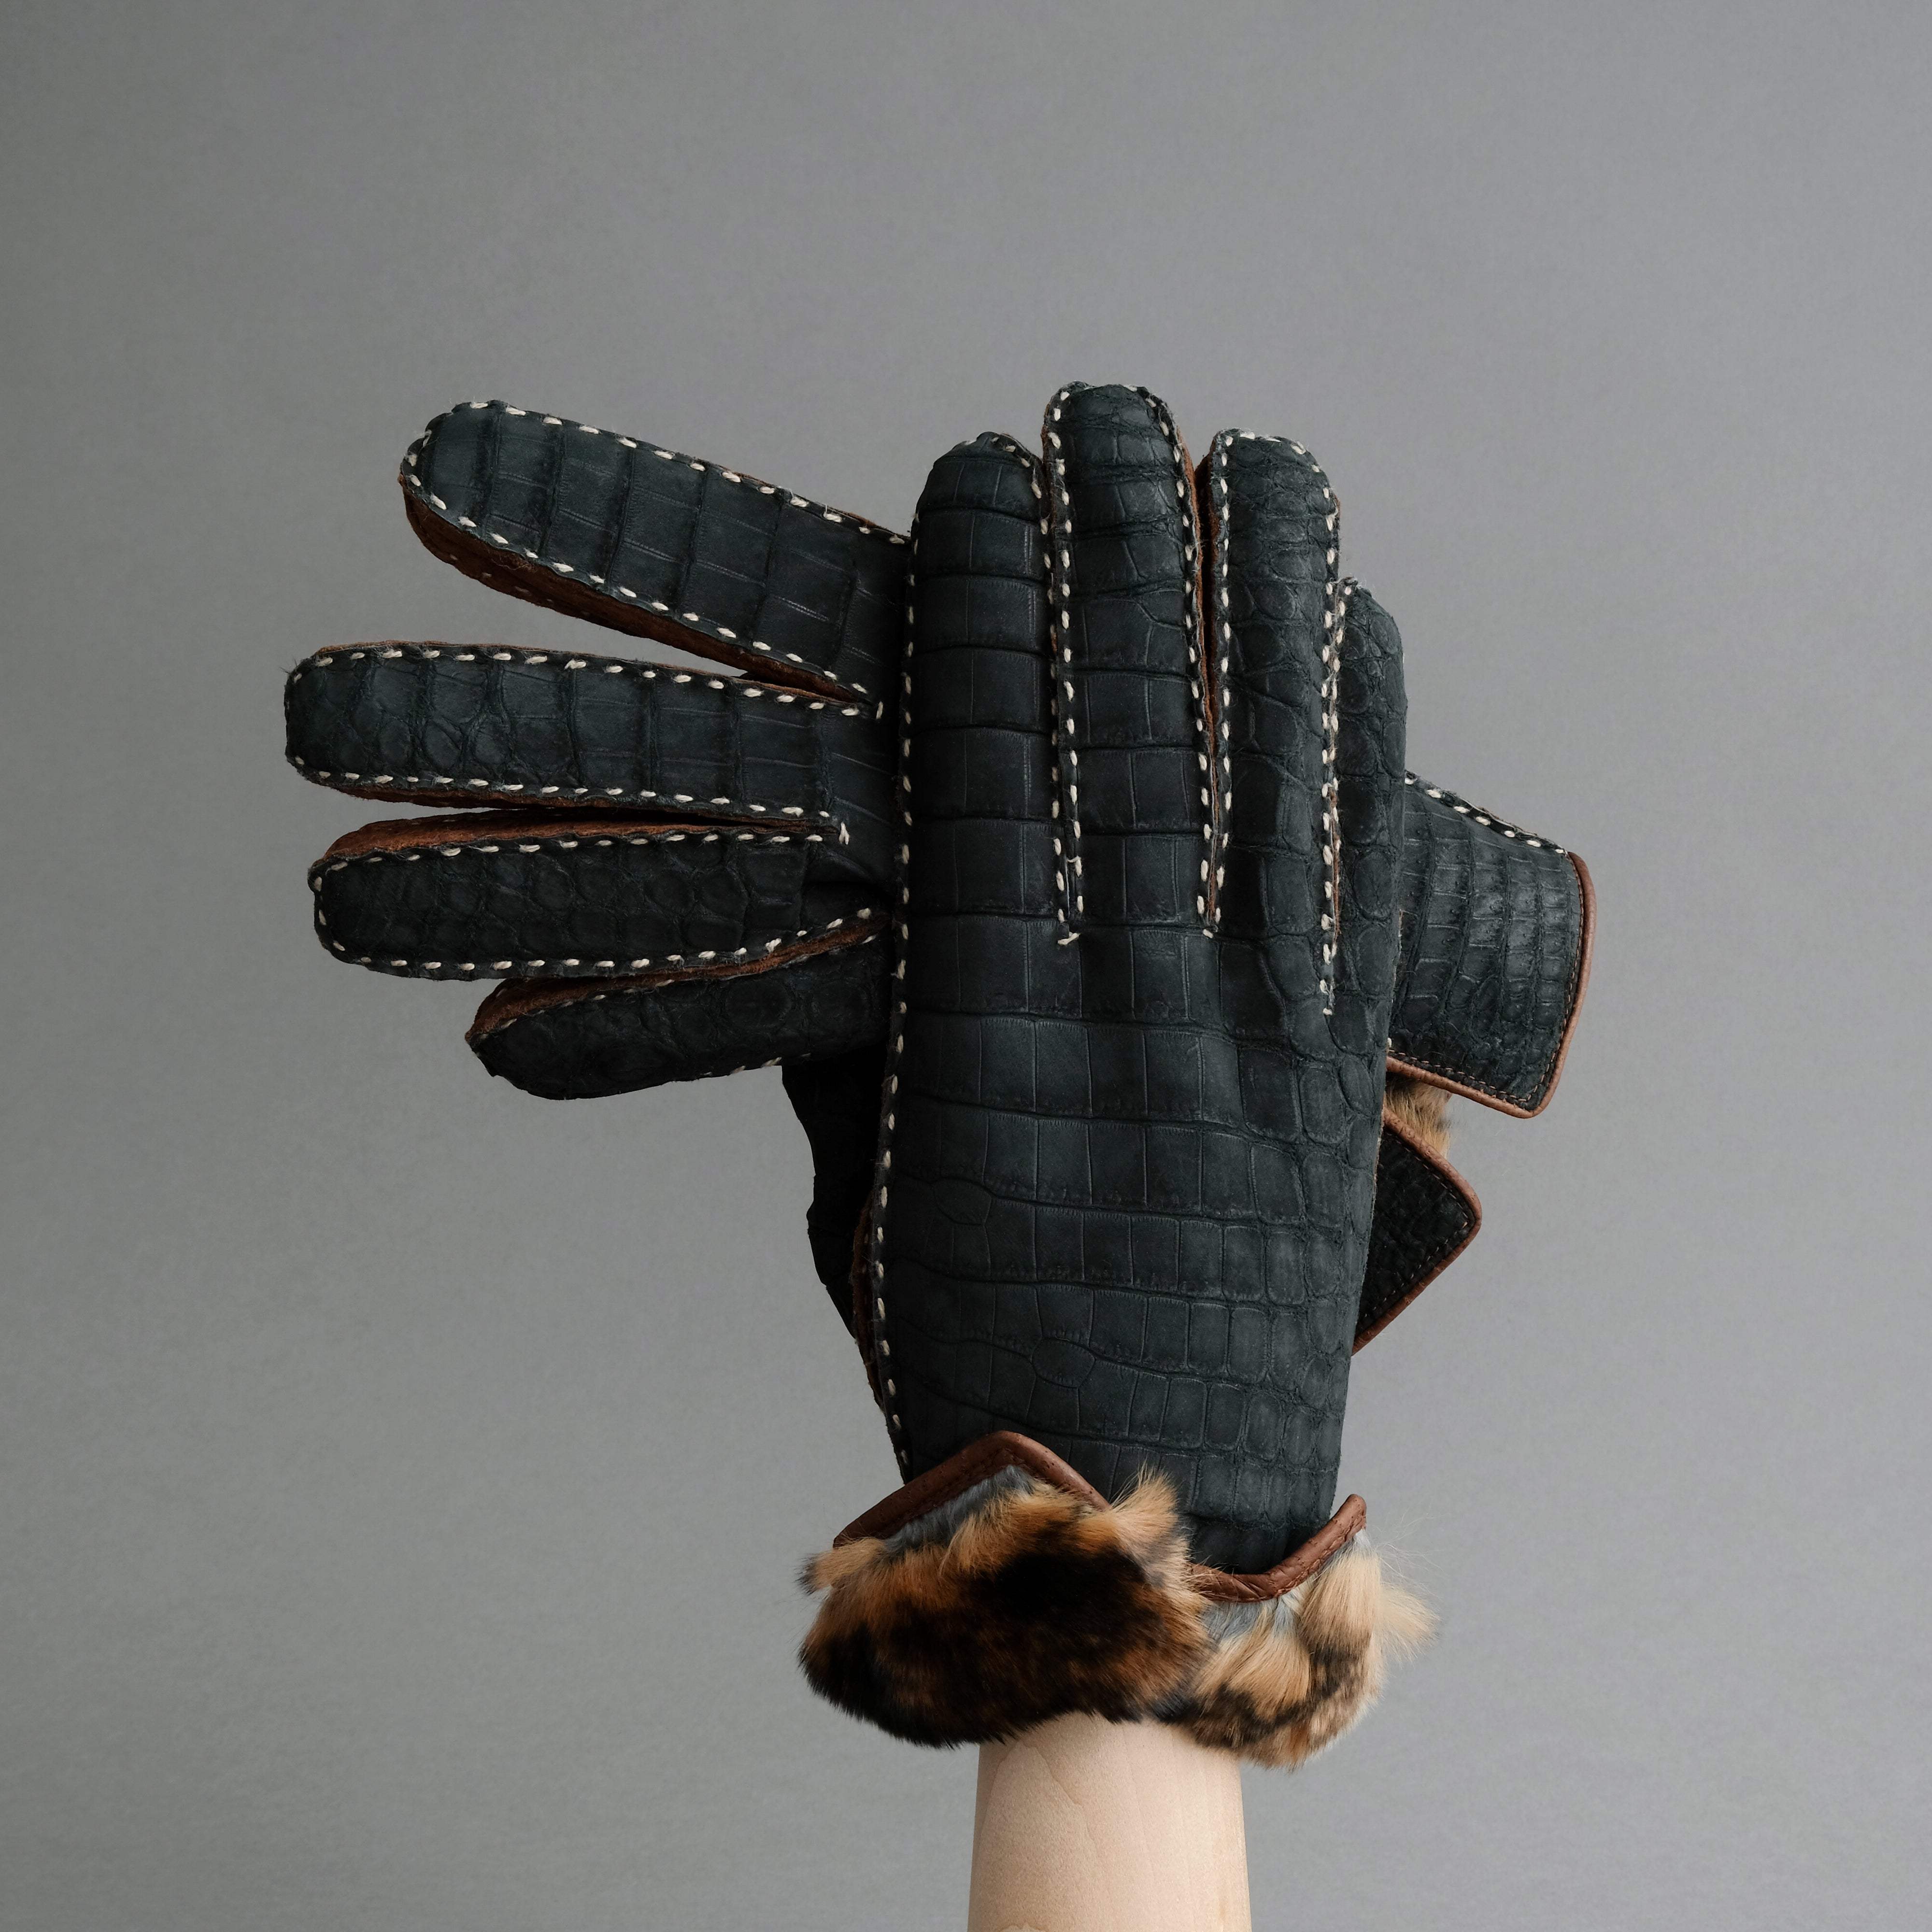 Gentlemen&#39;s Gloves from Crocodile and Peccary Leather - TR Handschuhe Wien - Thomas Riemer Handmade Gloves